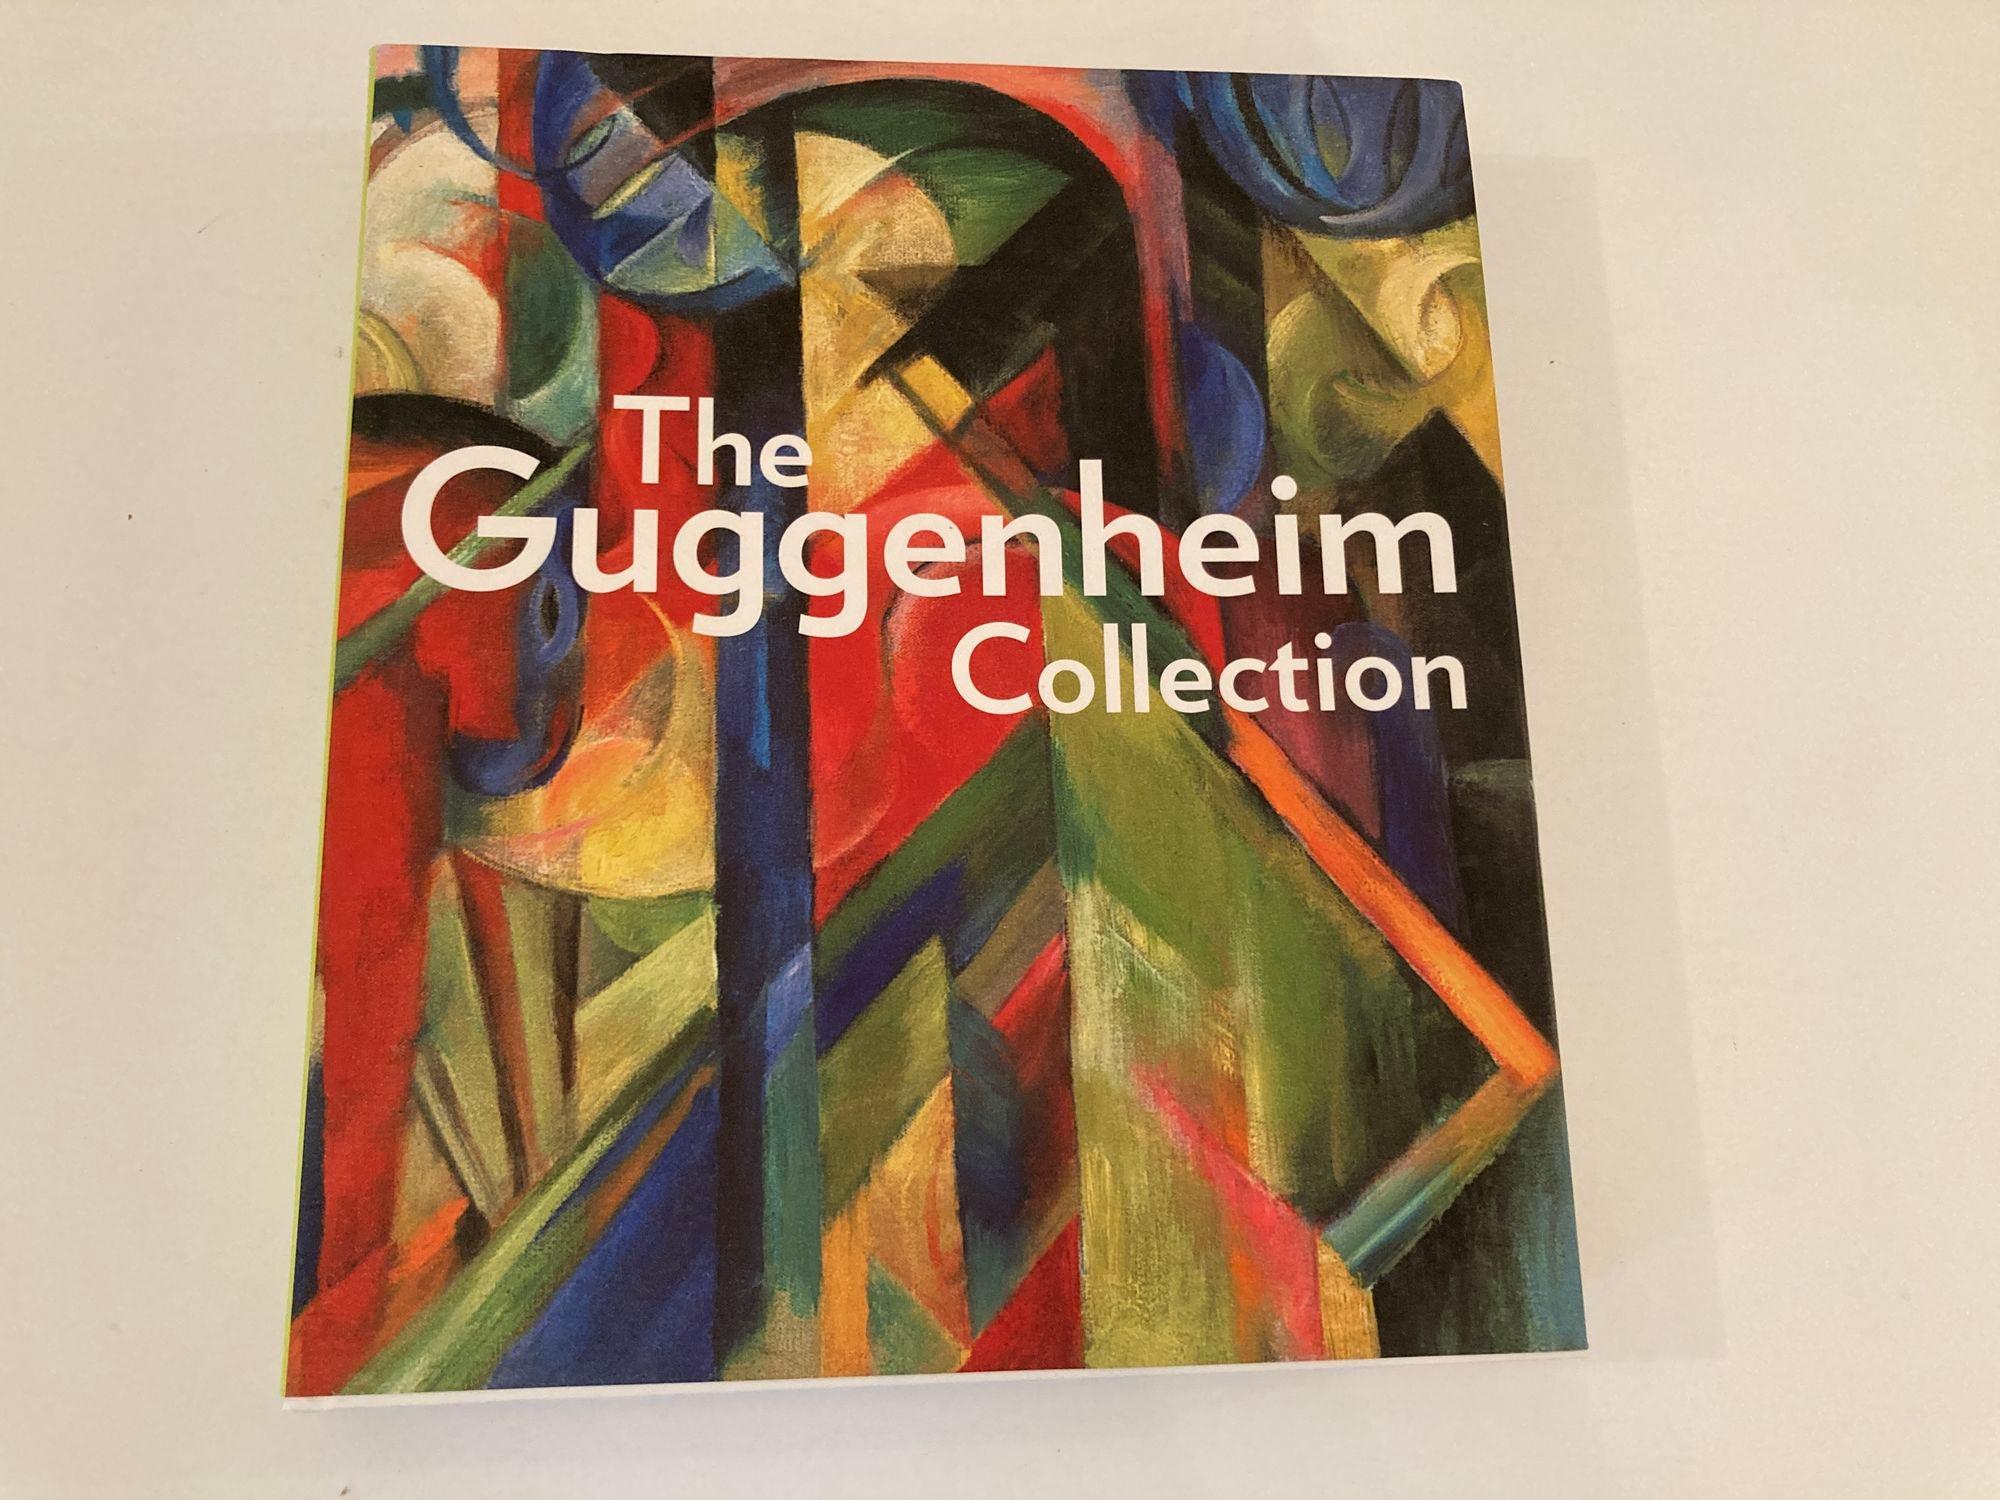 The Guggenheim Collection by Anthony Calnek; Matthew Drutt; Lisa Dennison; Michael Govan.
Guggenheim Museum Publications, New York, 2006. Hardcover exhibition catalogue, bound in white paper covered boards and wrapped in an illustrated paper